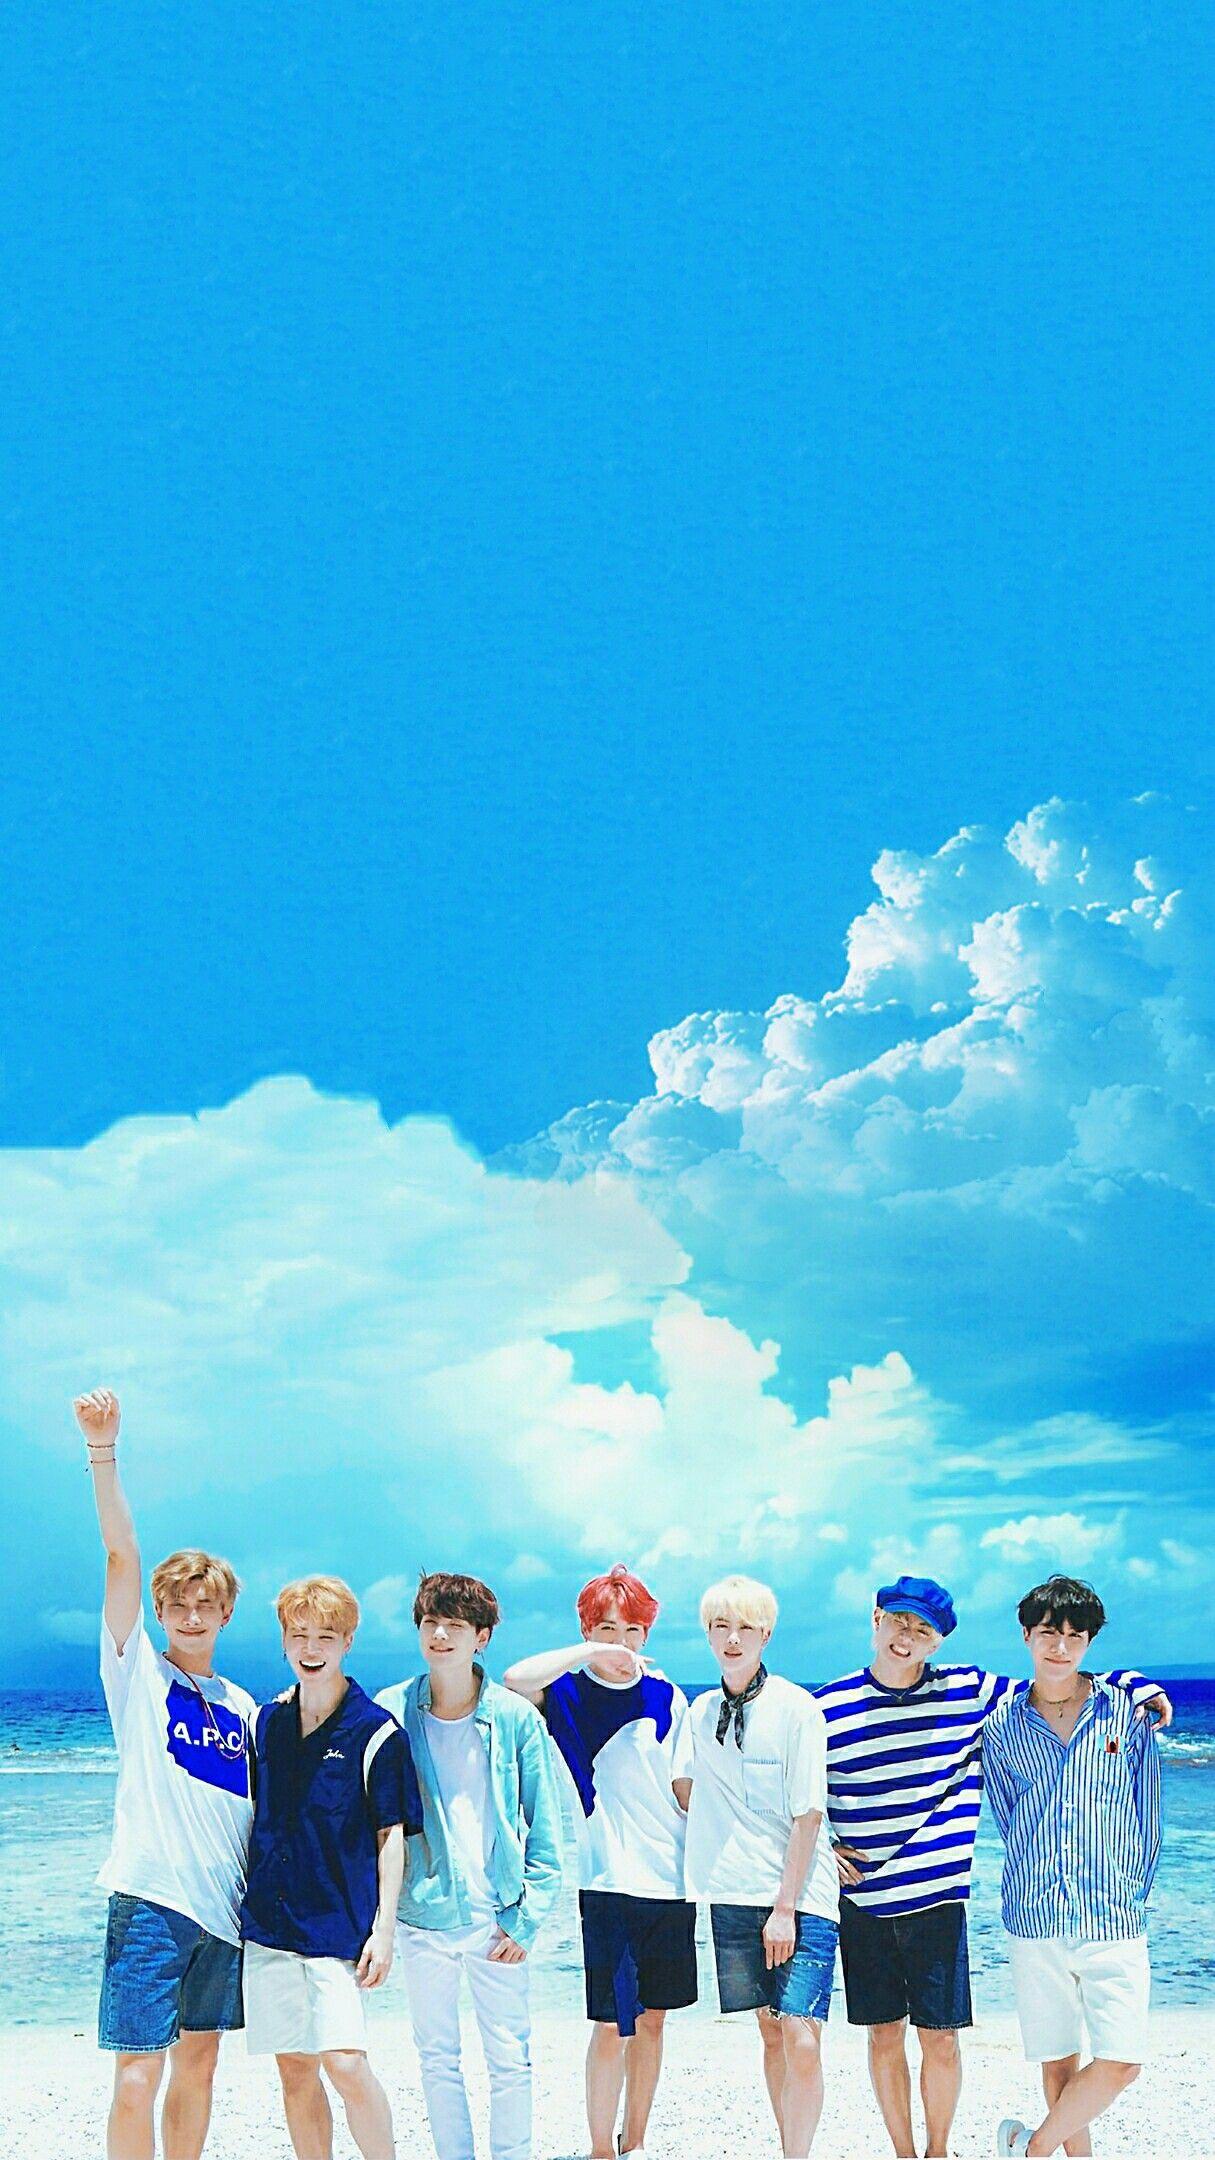 Free download BTS EDITS BTS WALLPAPERS BTS 2018 SUMMER PACKAGE IN